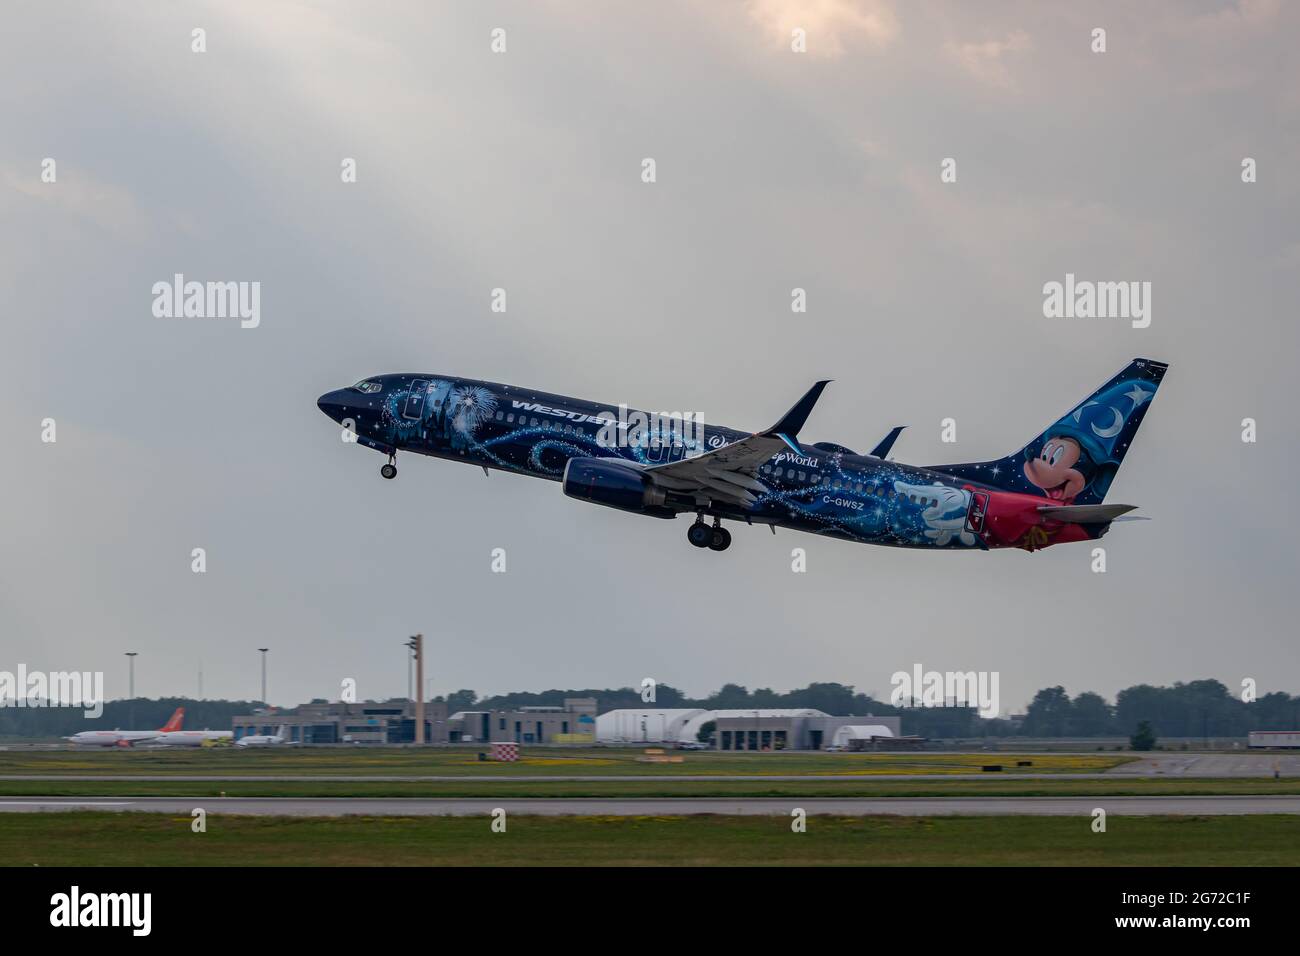 Montreal, Quebec, Canada - 07 07 2021: Westjet's Walt Disney World livery on their 737-8CT taking off from Montreal. Registration C-GWSZ Stock Photo